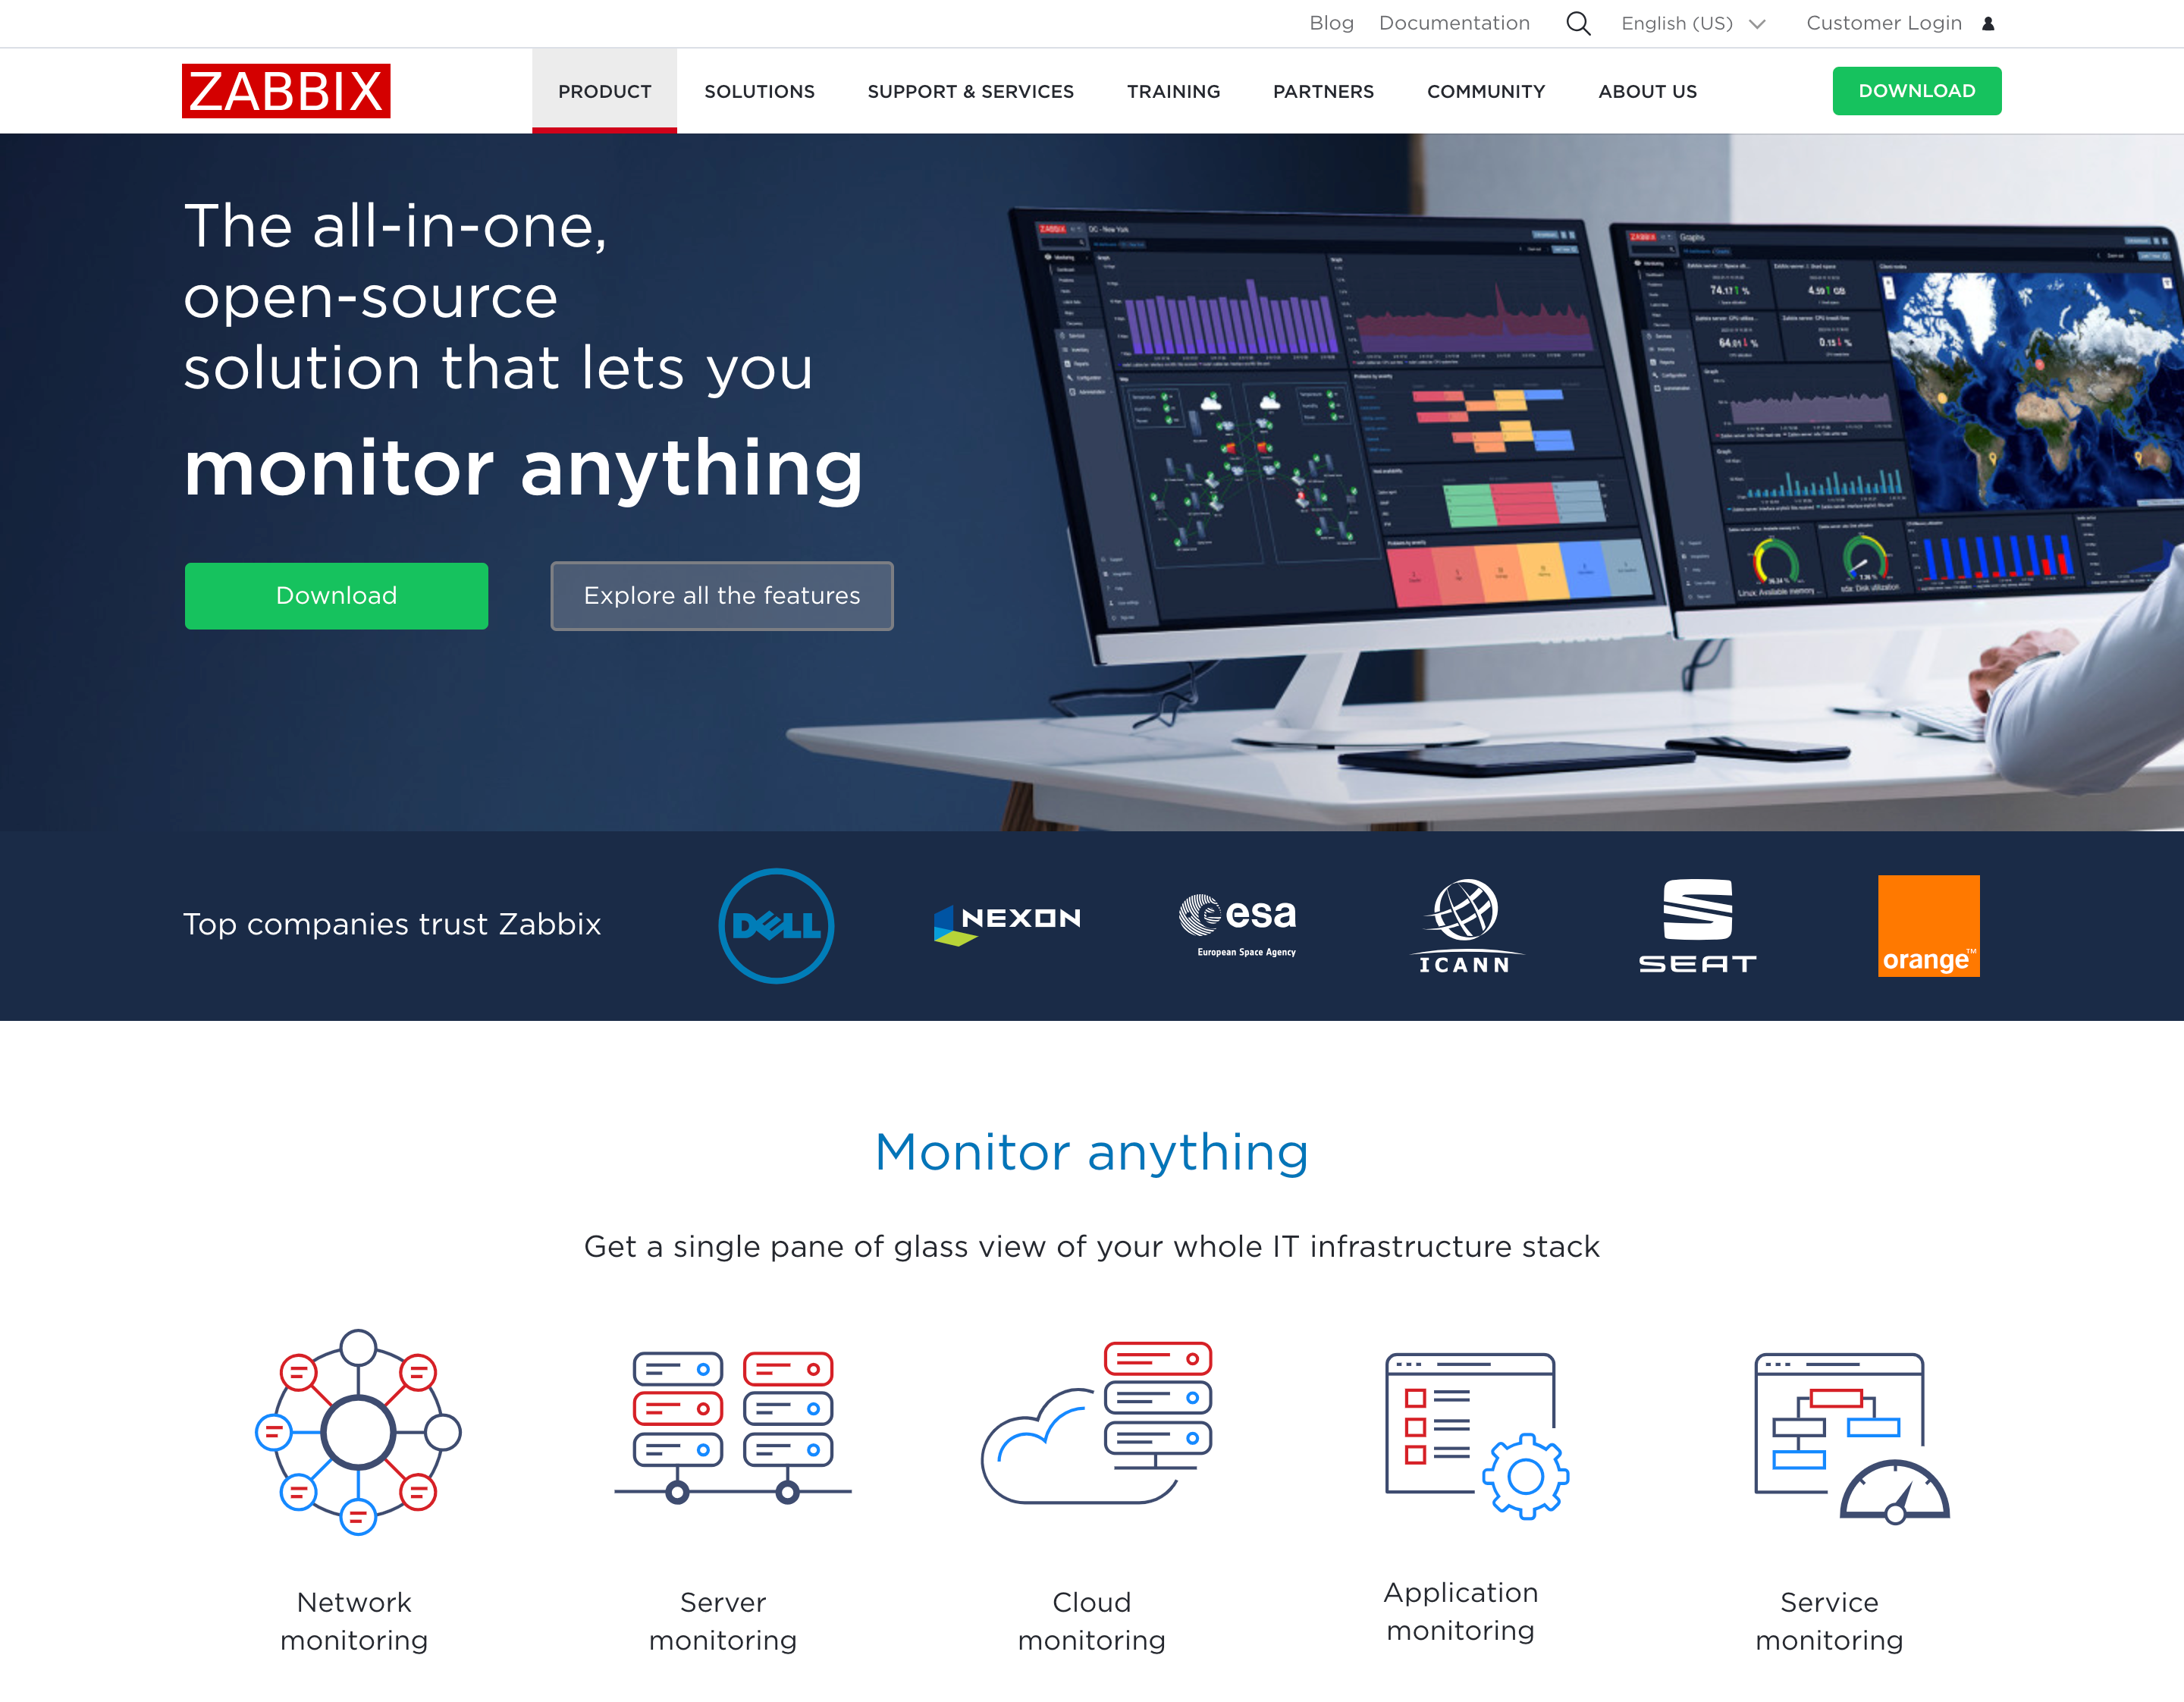 Zabbix home page for cloud monitoring tools